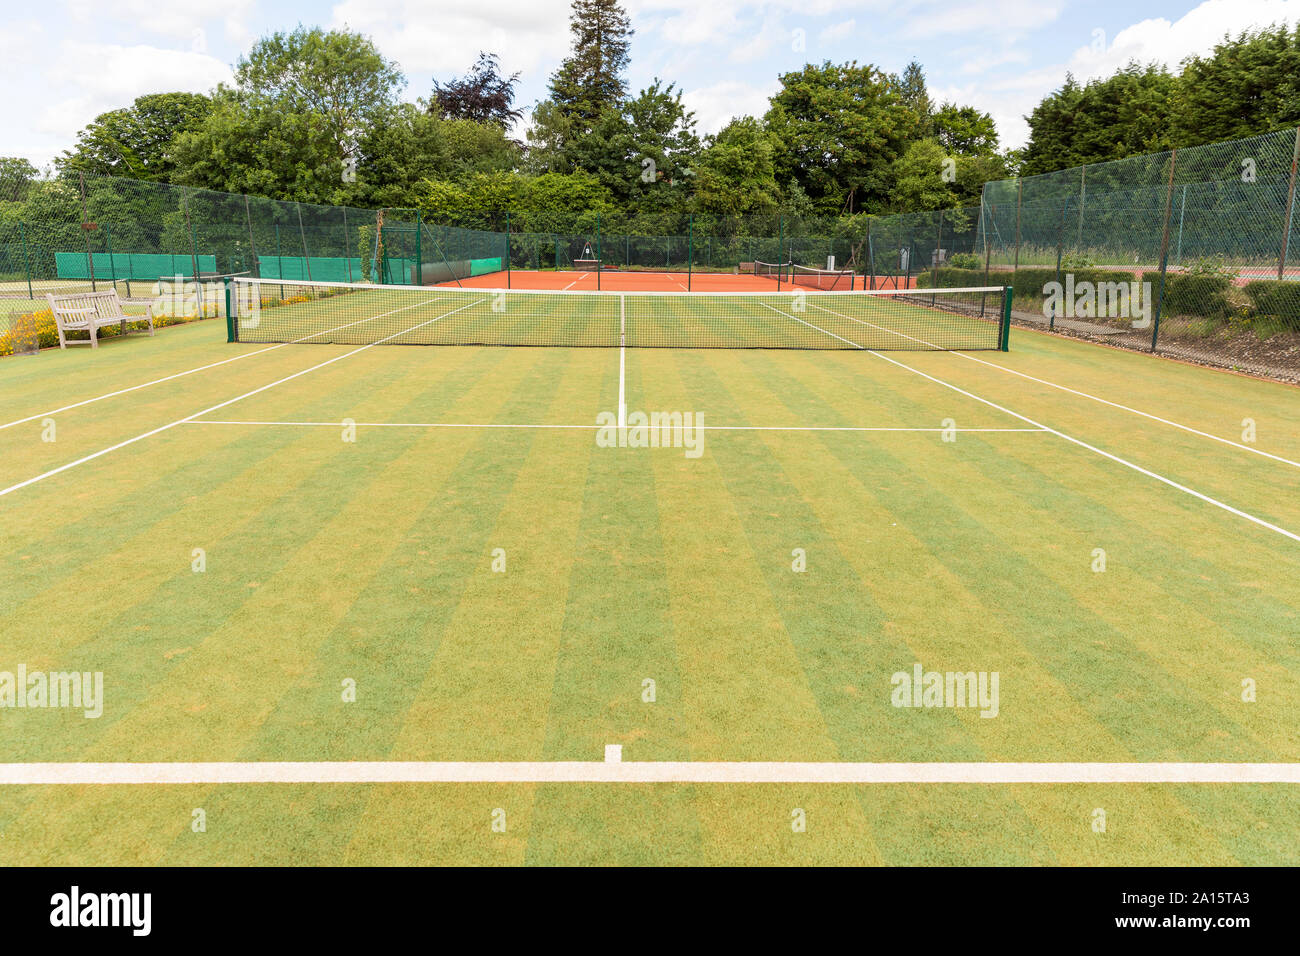 Tennis net and single line markings in empty court against trees Stock Photo